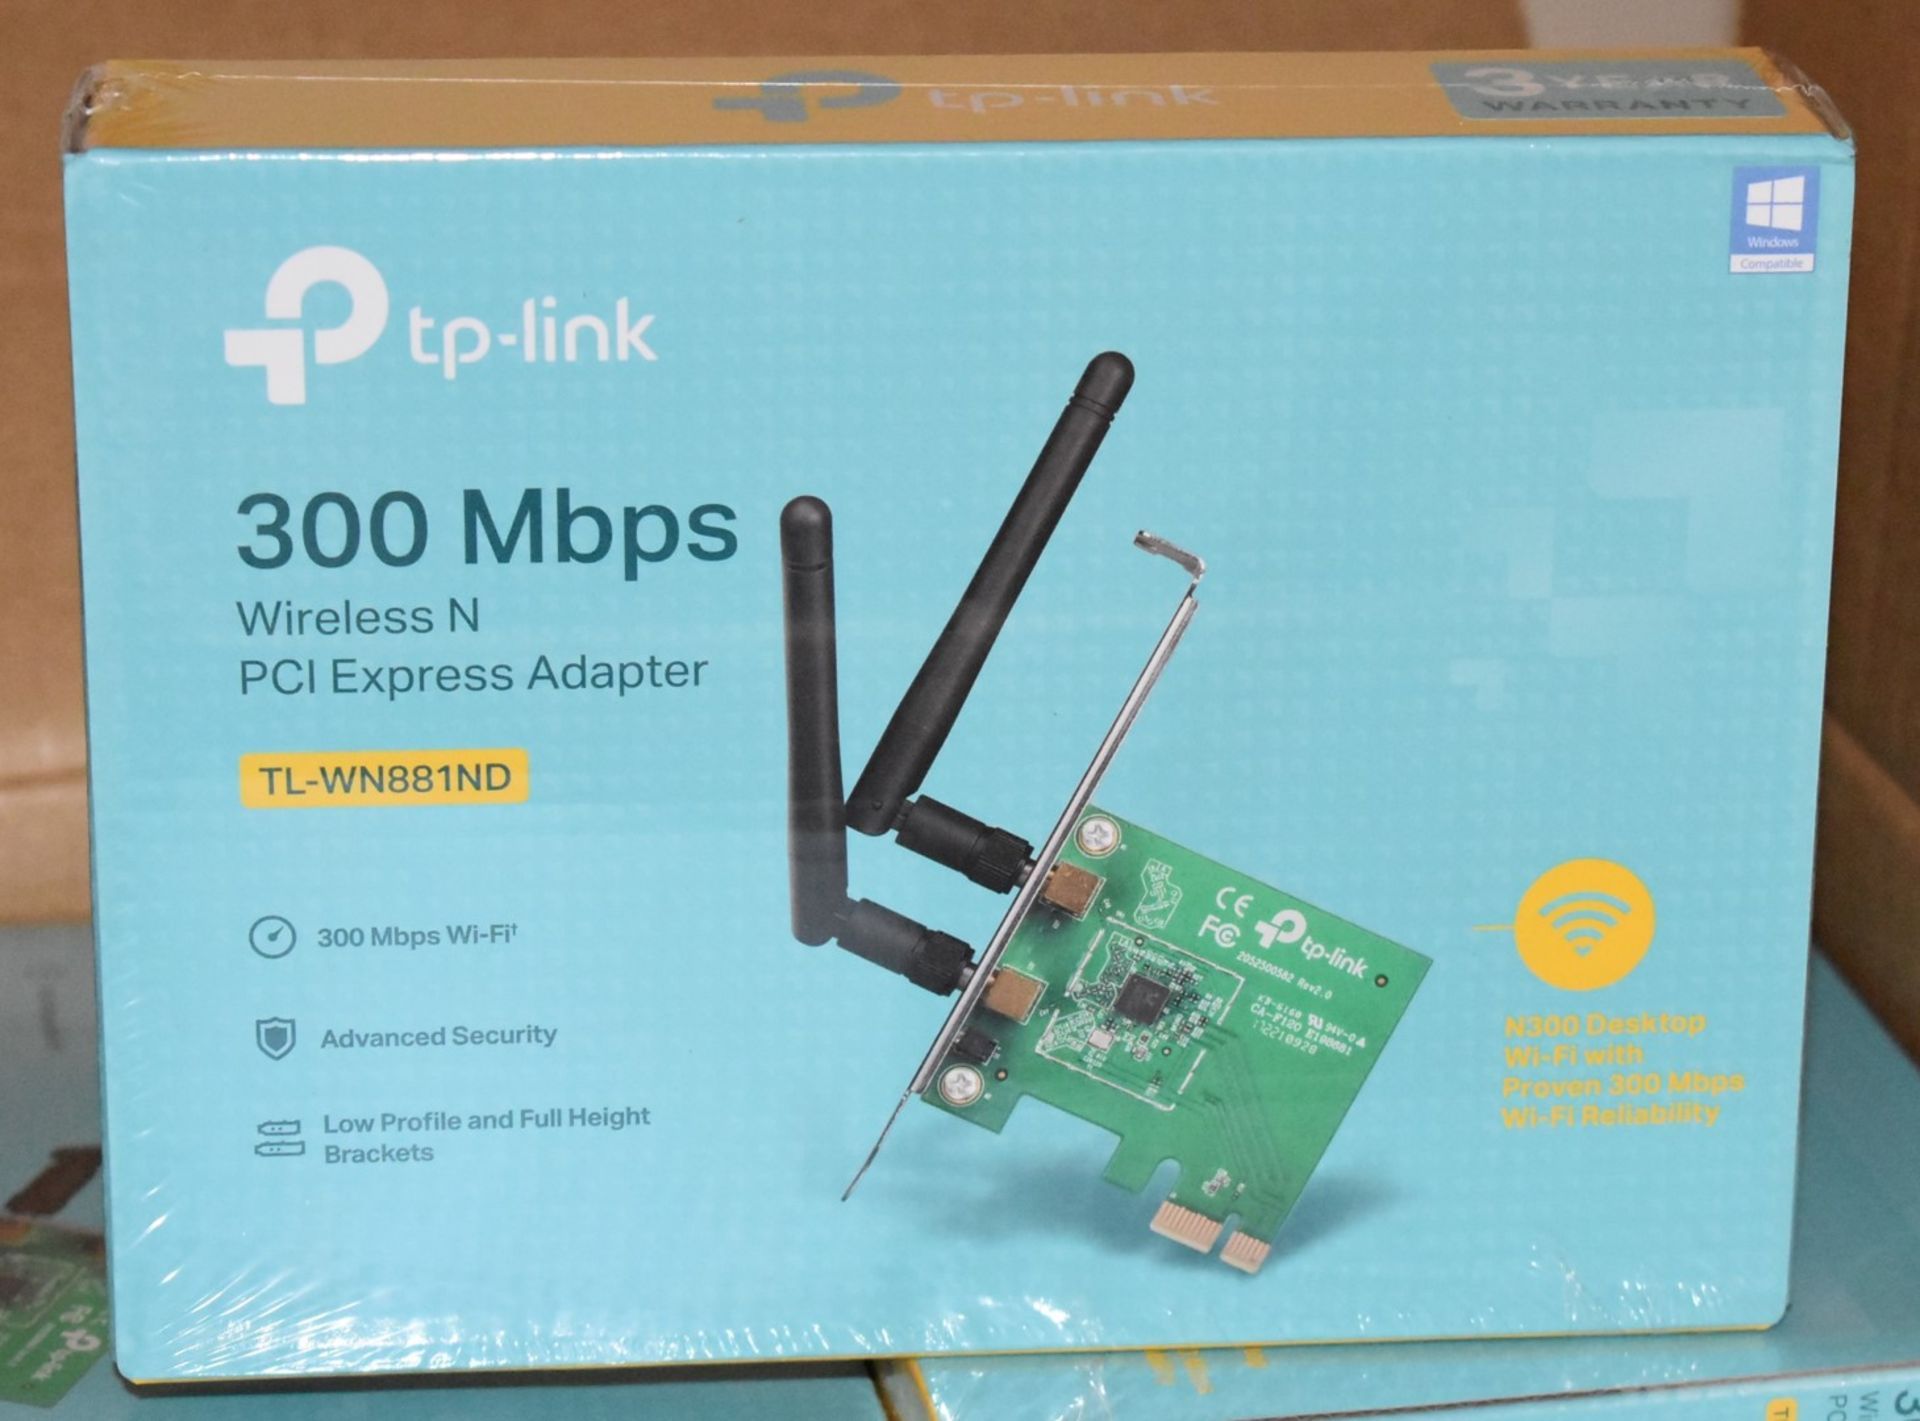 5 x TP-Link TL-WN881ND 300mbps Wireless N Pci Express Adapters - New Boxed Stock - RRP £80 - Image 4 of 4